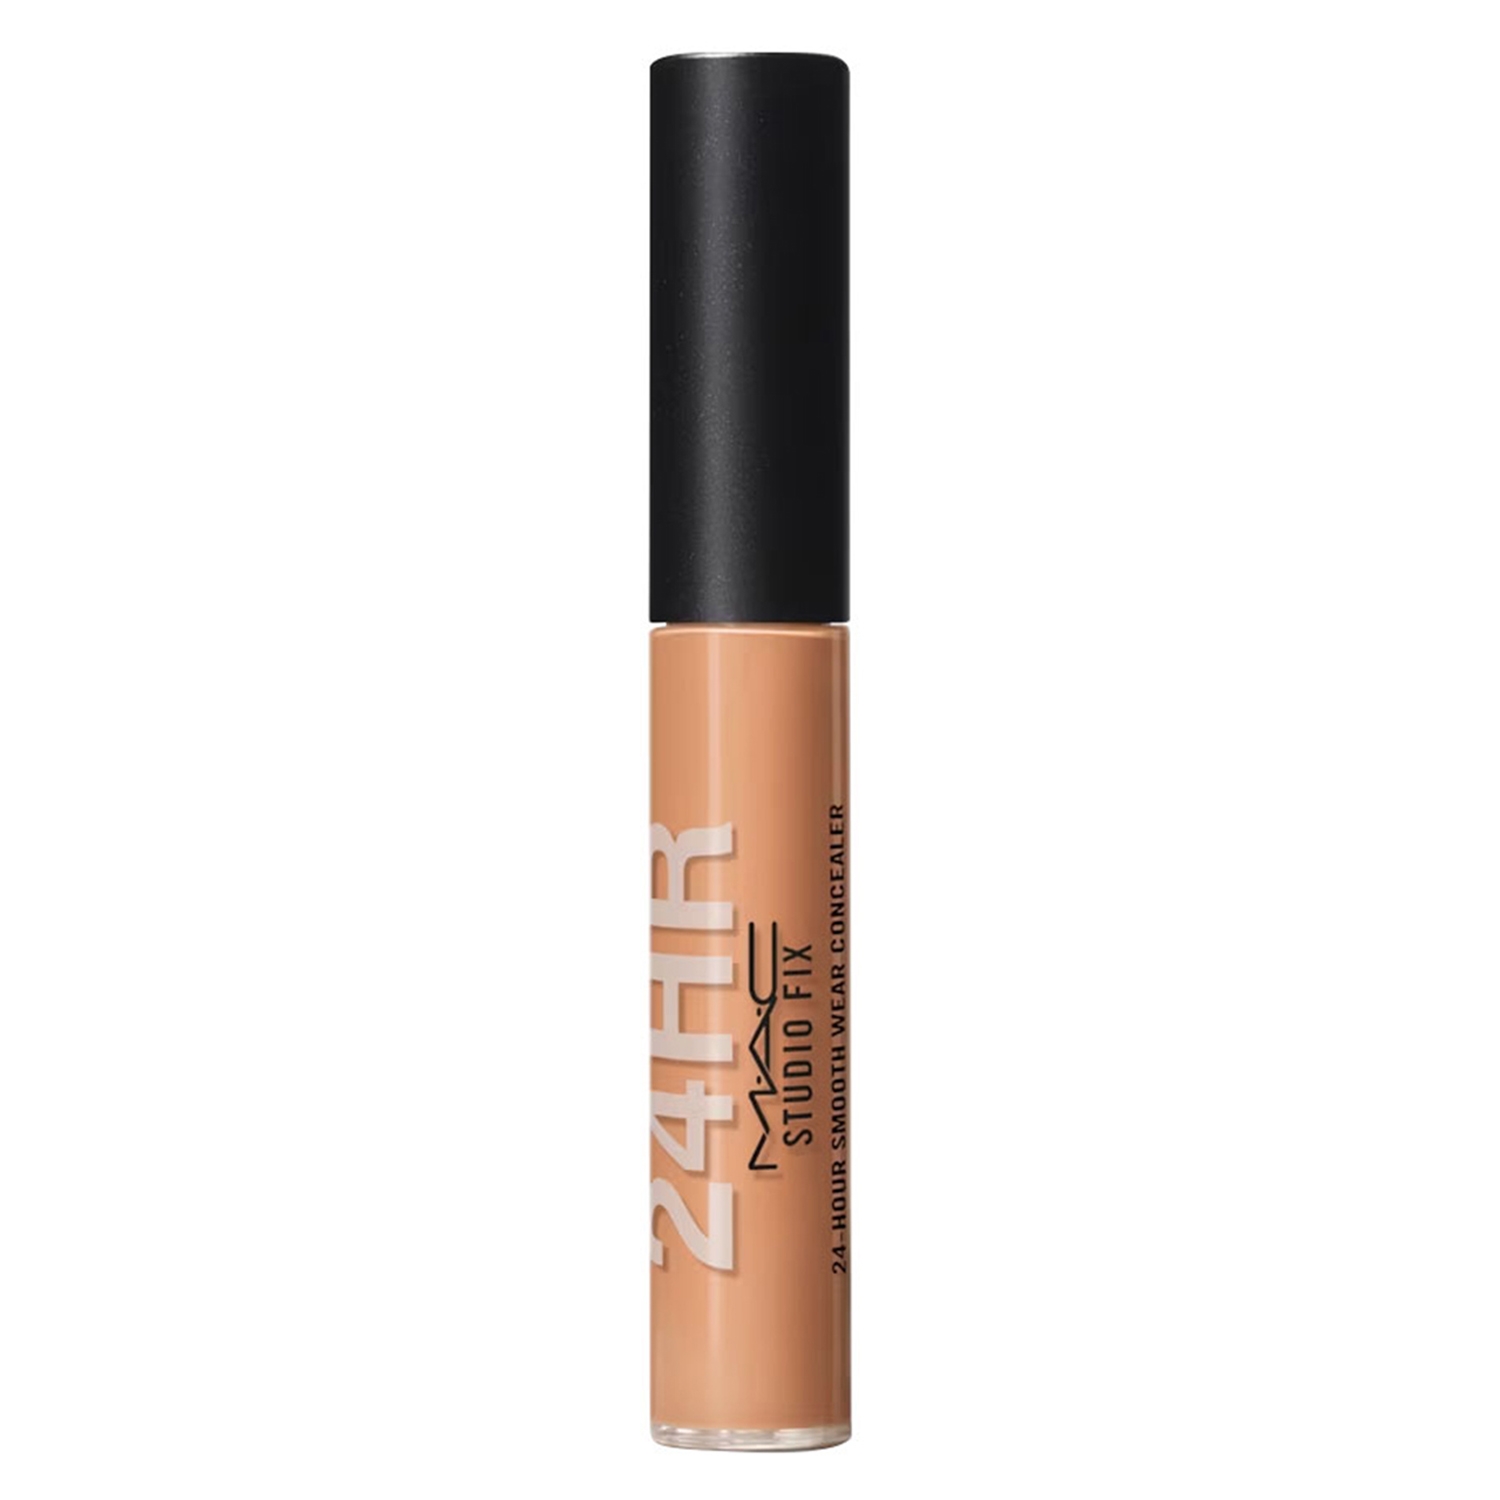 M.A.C | M.A.C Studio Fix 24-Hour Smooth Wear Concealer - NW30 (7ml)